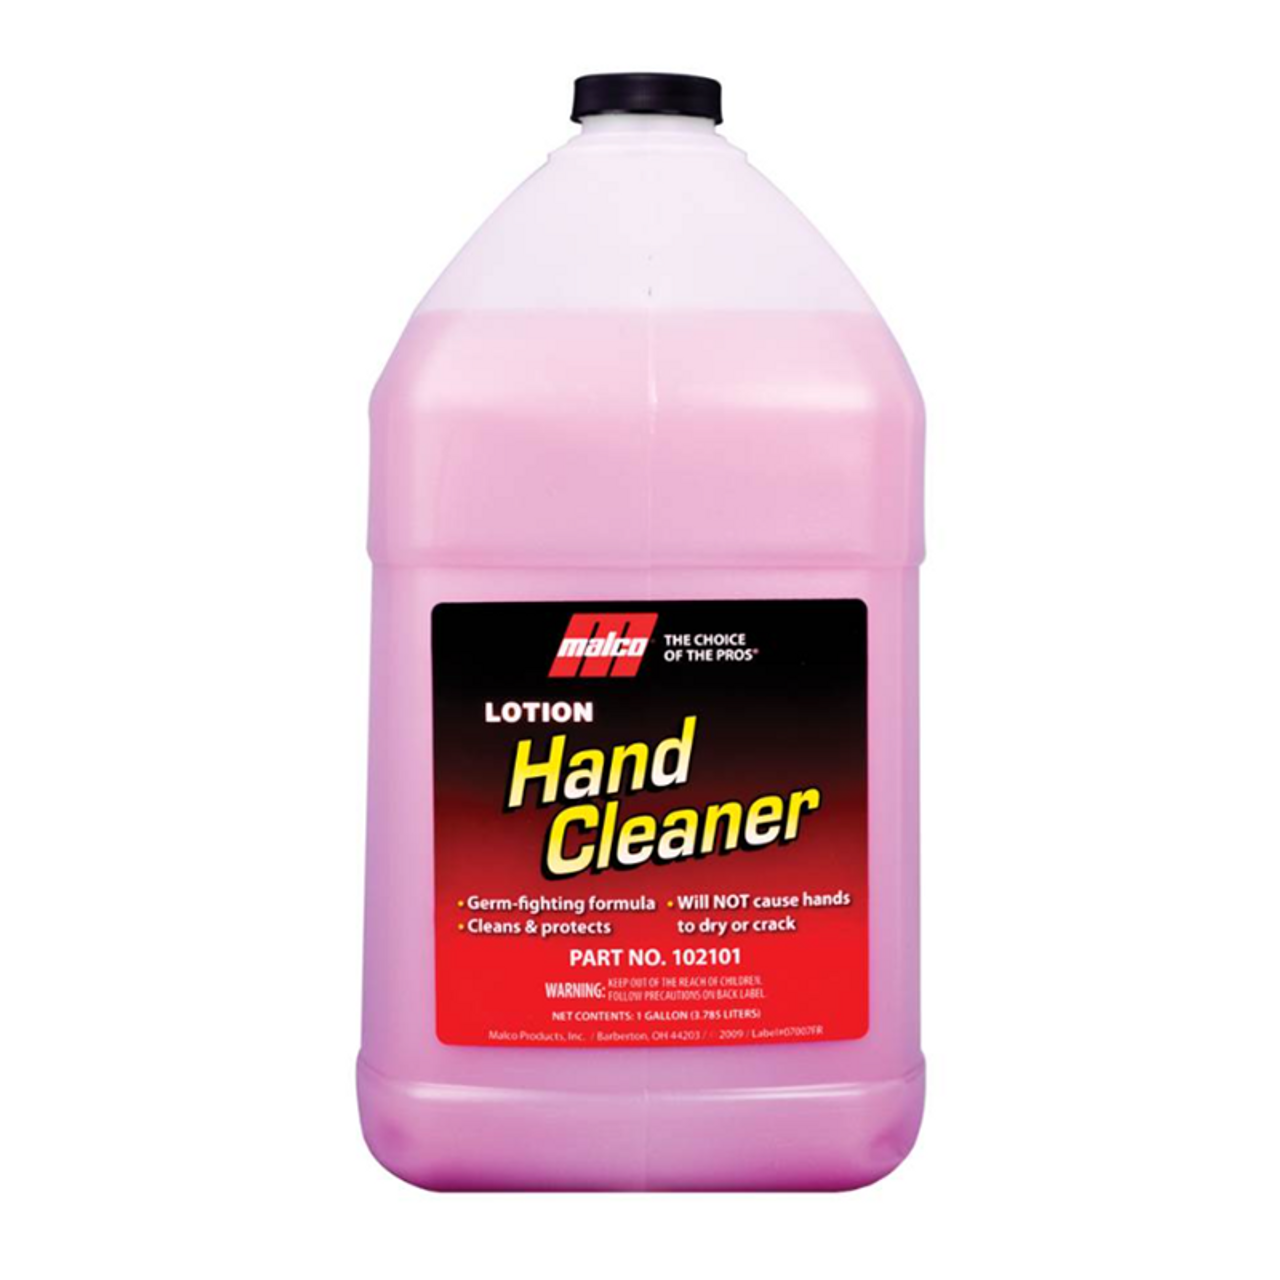 Lotion Hand Cleaner 1 Gallon